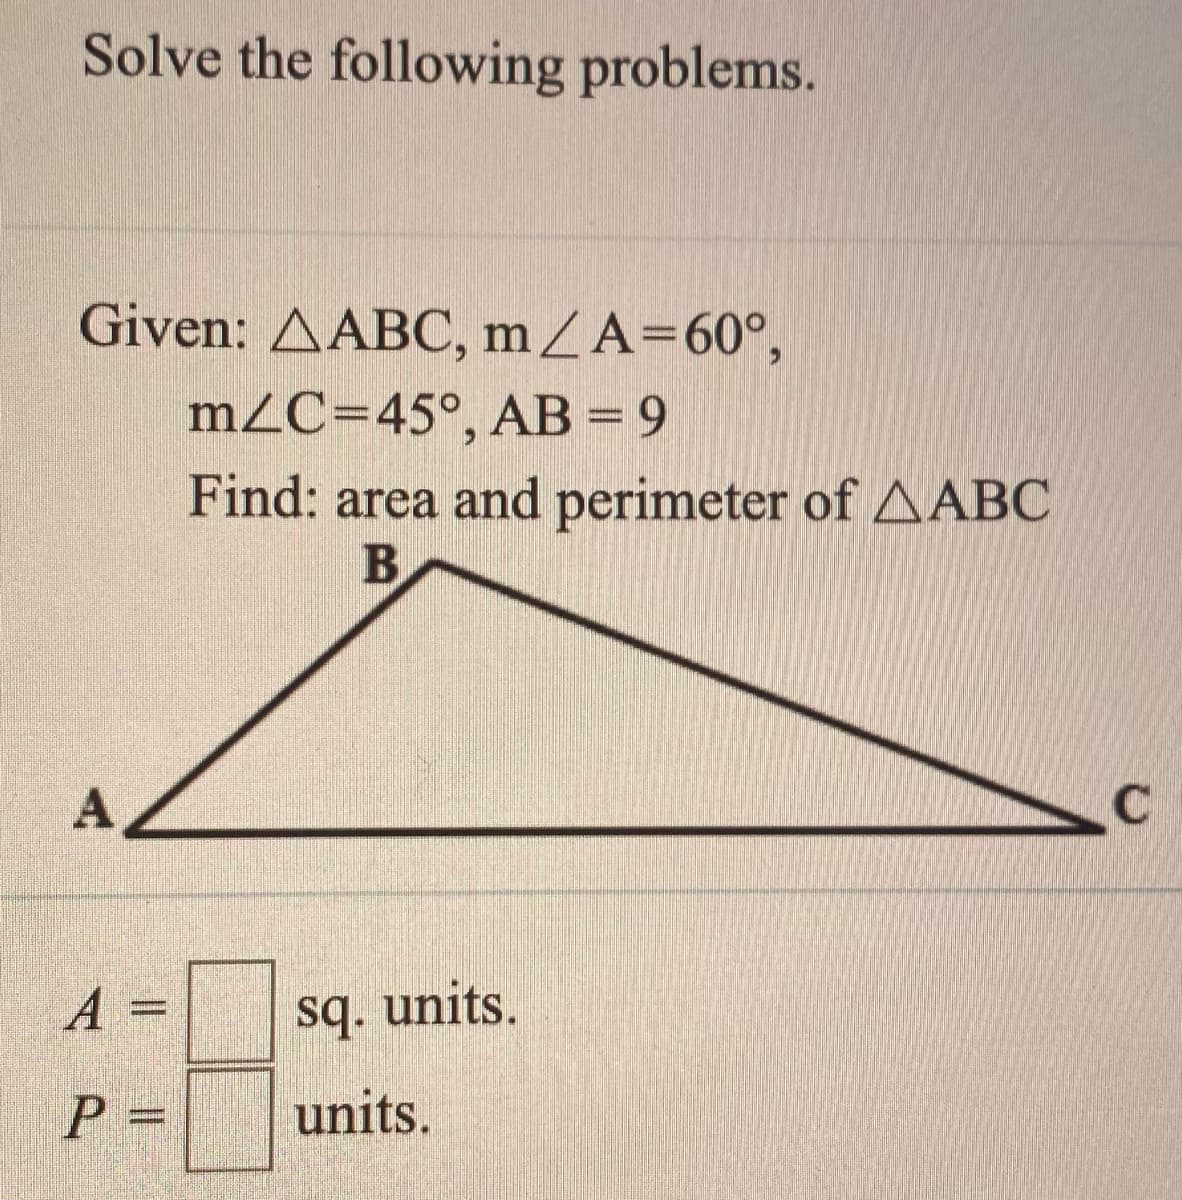 Solve the following problems.
Given: AABC, mZA=60°,
m2C=45°, AB = 9
Find: area and perimeter of AABC
A
A
sq. units.
P =
units.
